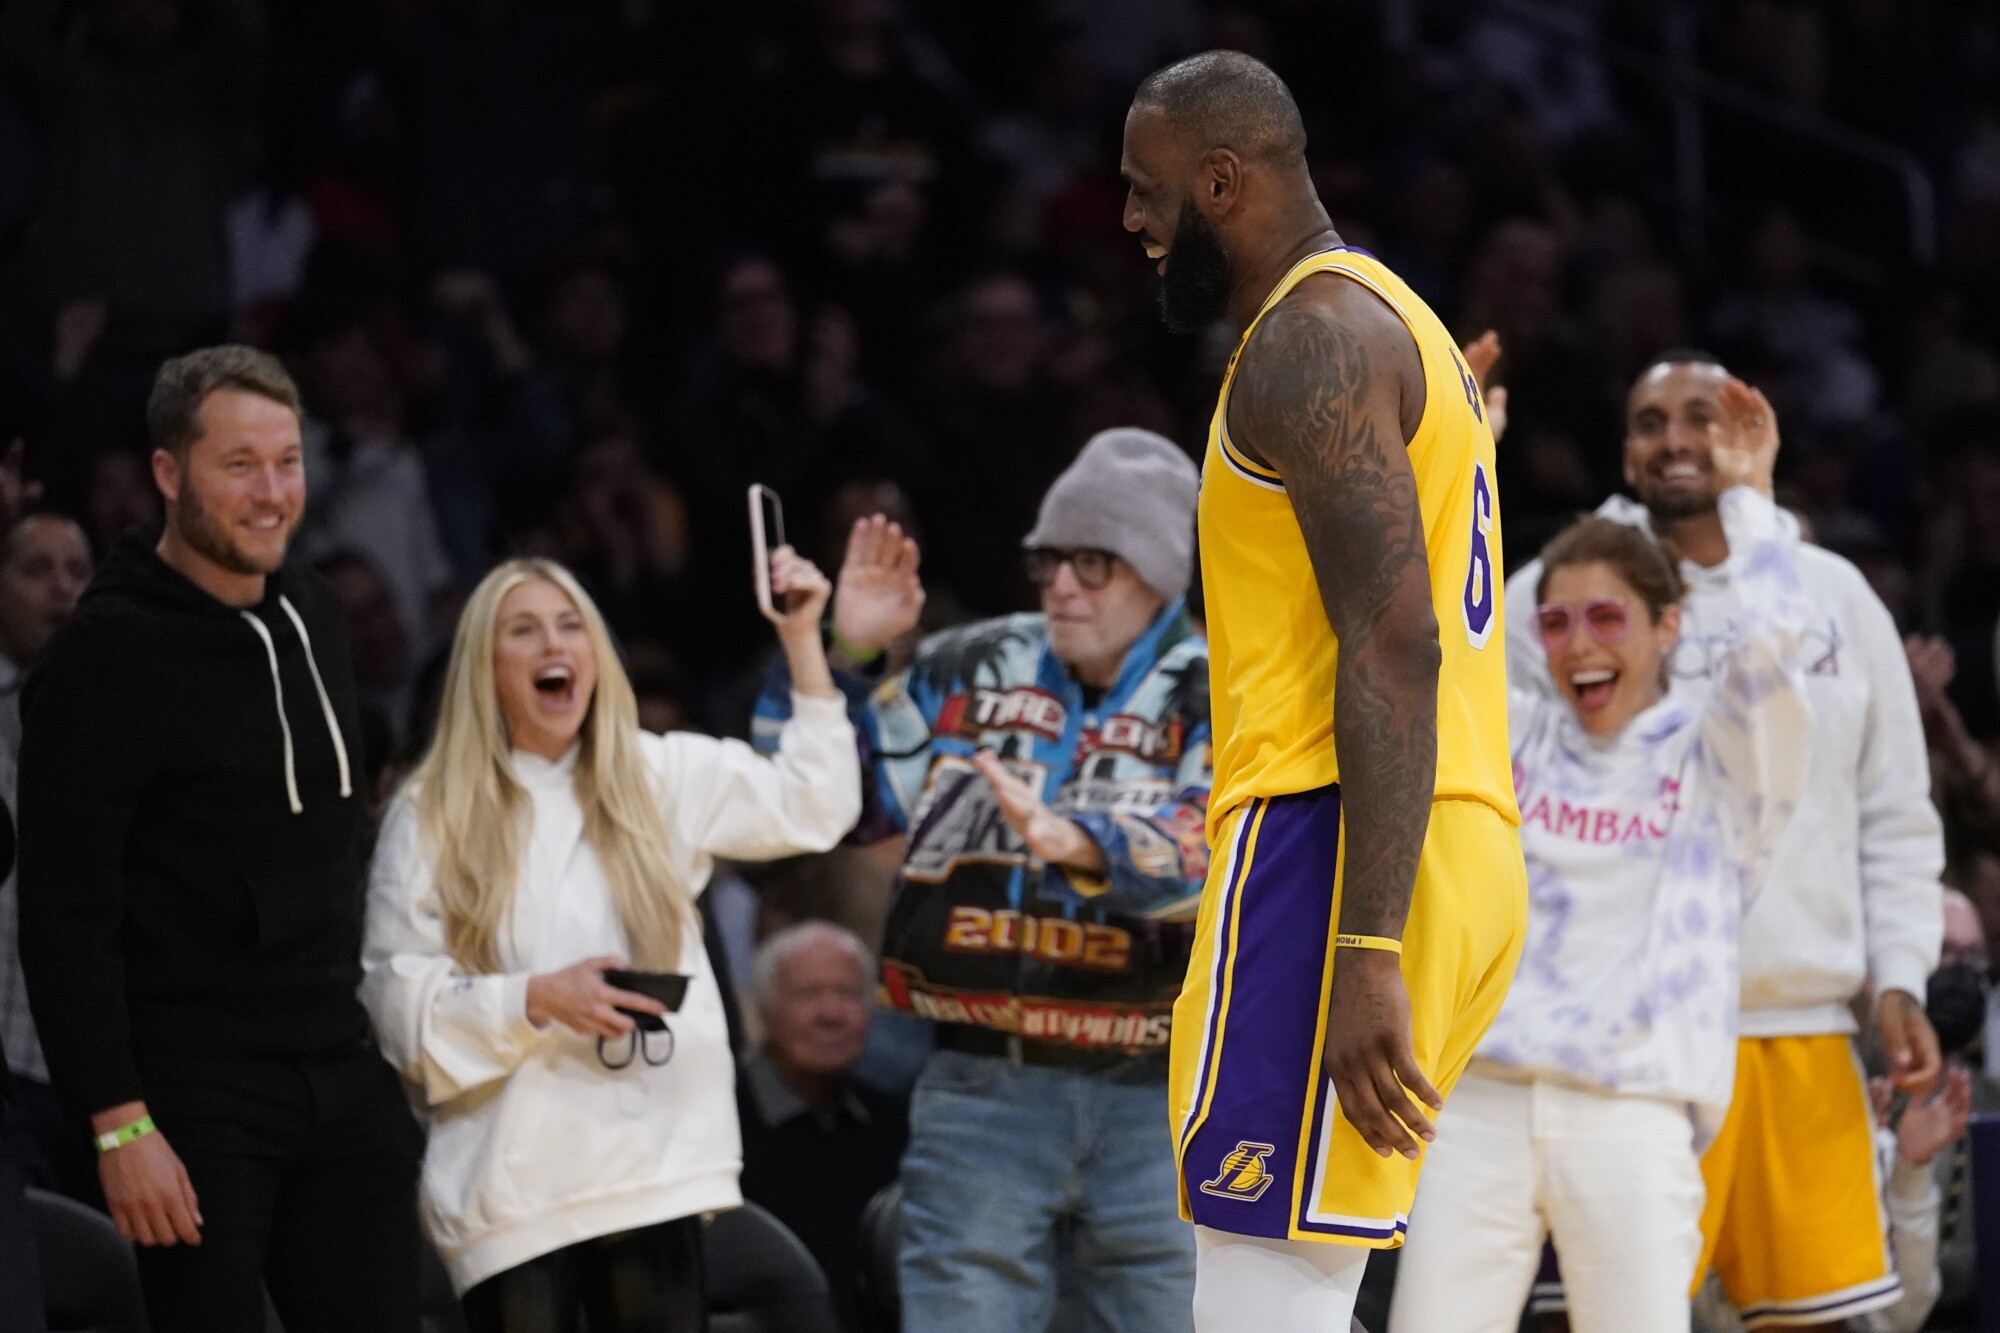 Lakers forward LeBron James is all smiles after making a three-pointer.